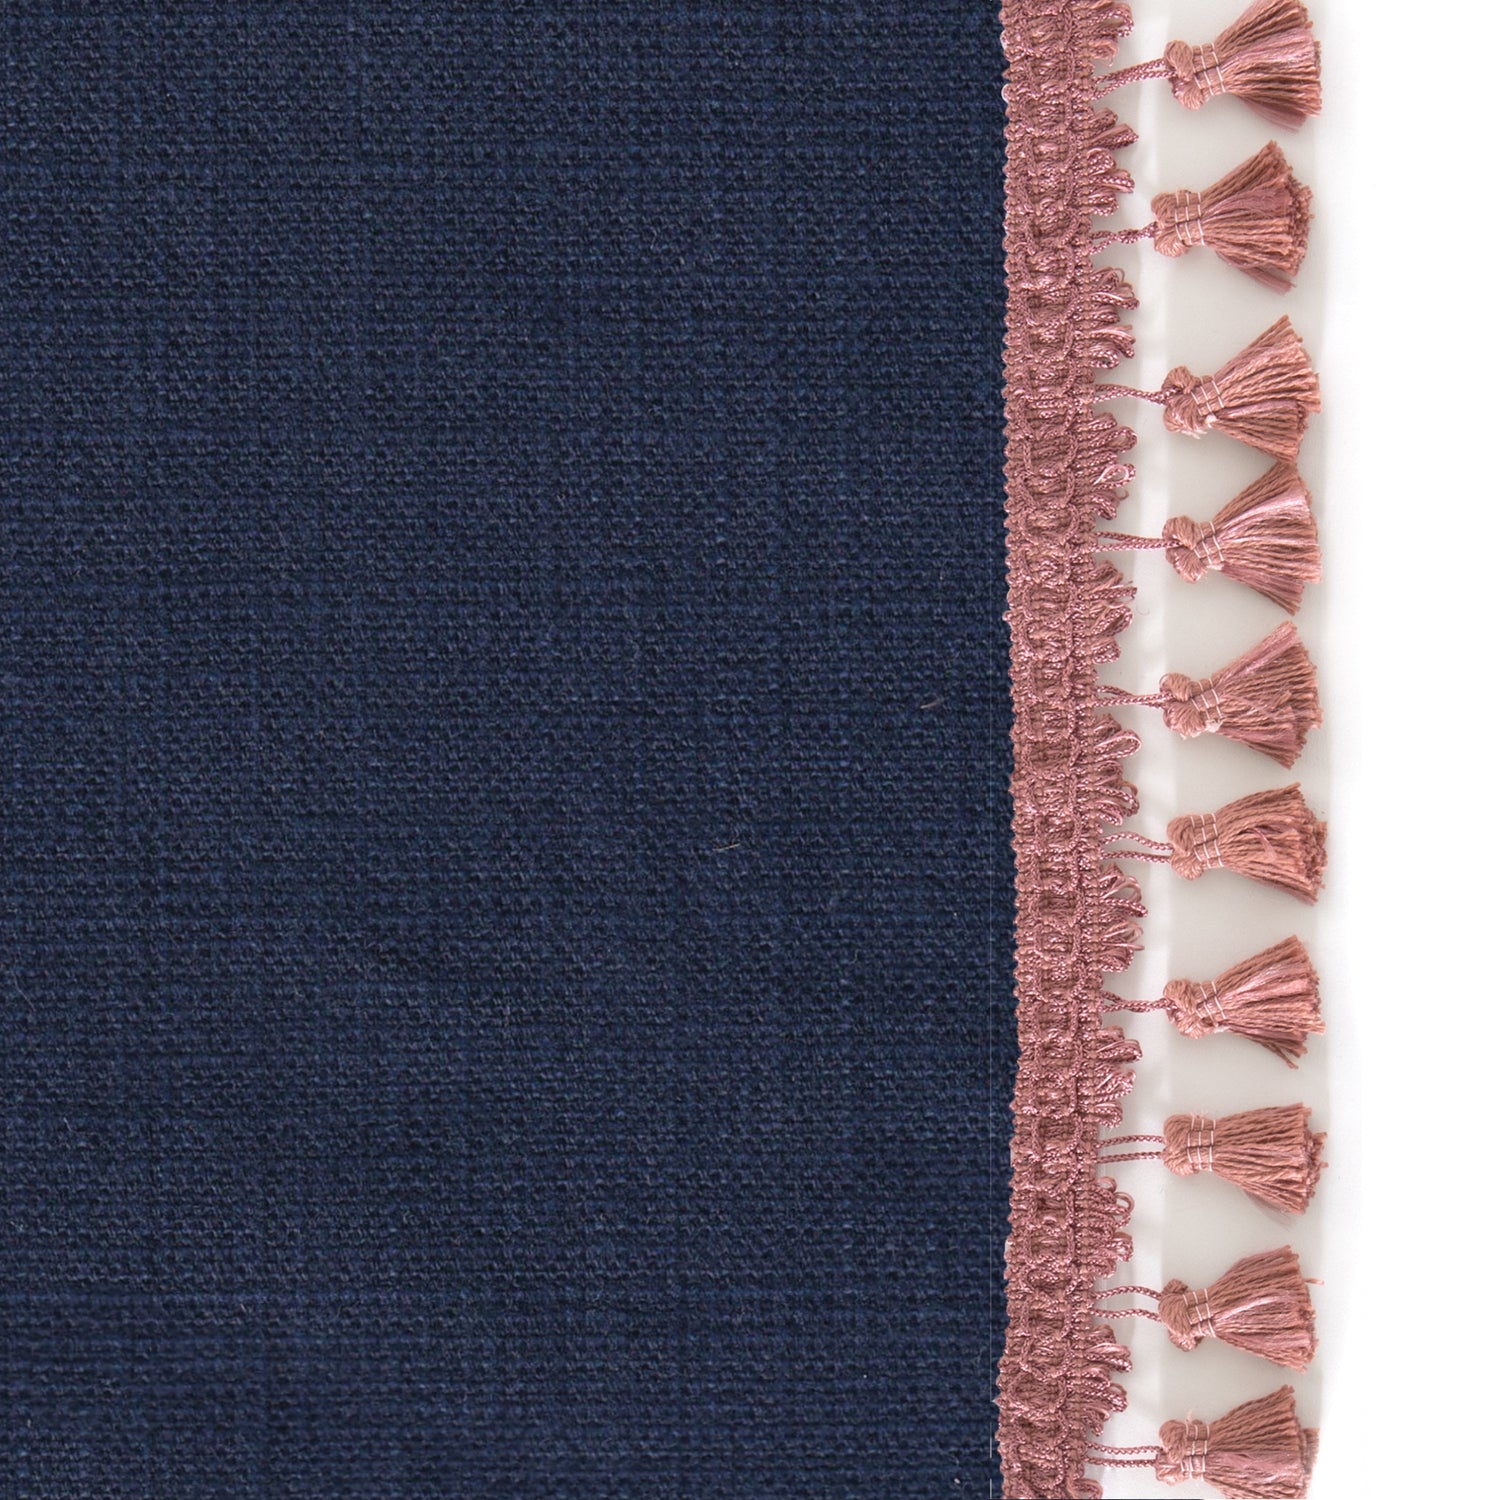 Upclose picture of Midnight custom Navy Bluecurtain with dusty rose tassel trim